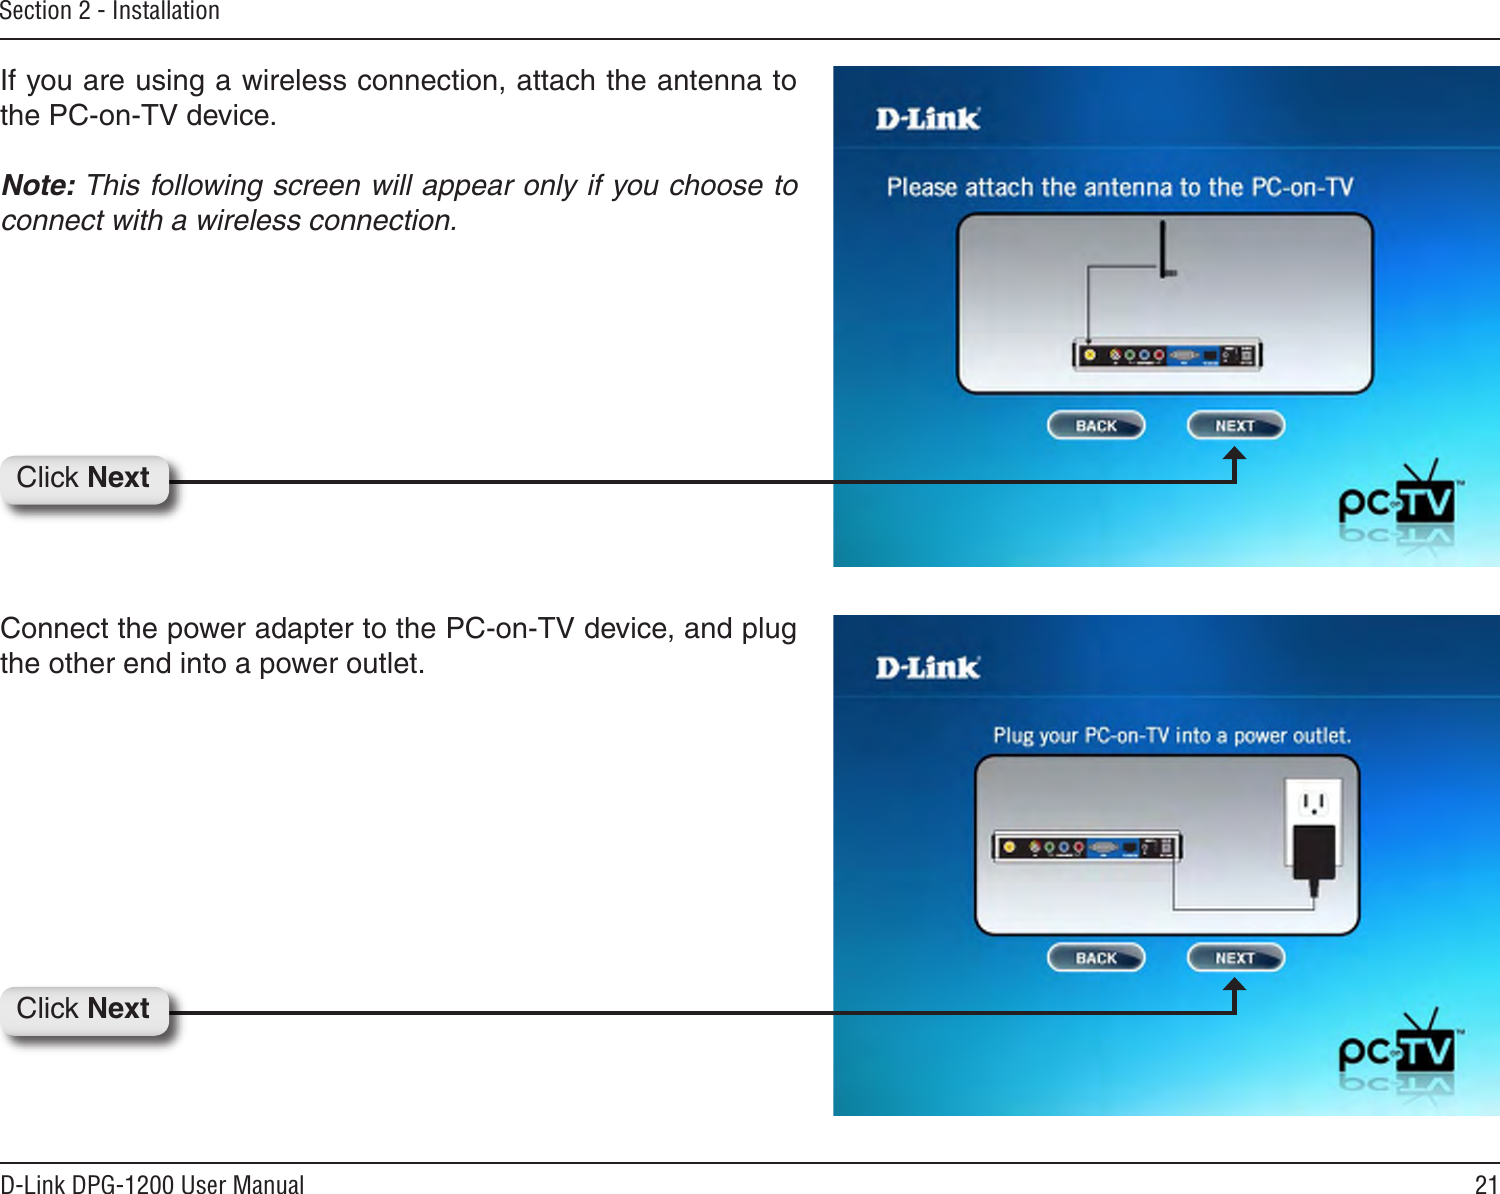 21D-Link DPG-1200 User ManualSection 2 - InstallationConnect the power adapter to the PC-on-TV device, and plug the other end into a power outlet.Click NextIf you are using a wireless connection, attach the antenna to the PC-on-TV device.Note: This following screen will appear only if you choose to connect with a wireless connection.Click Next